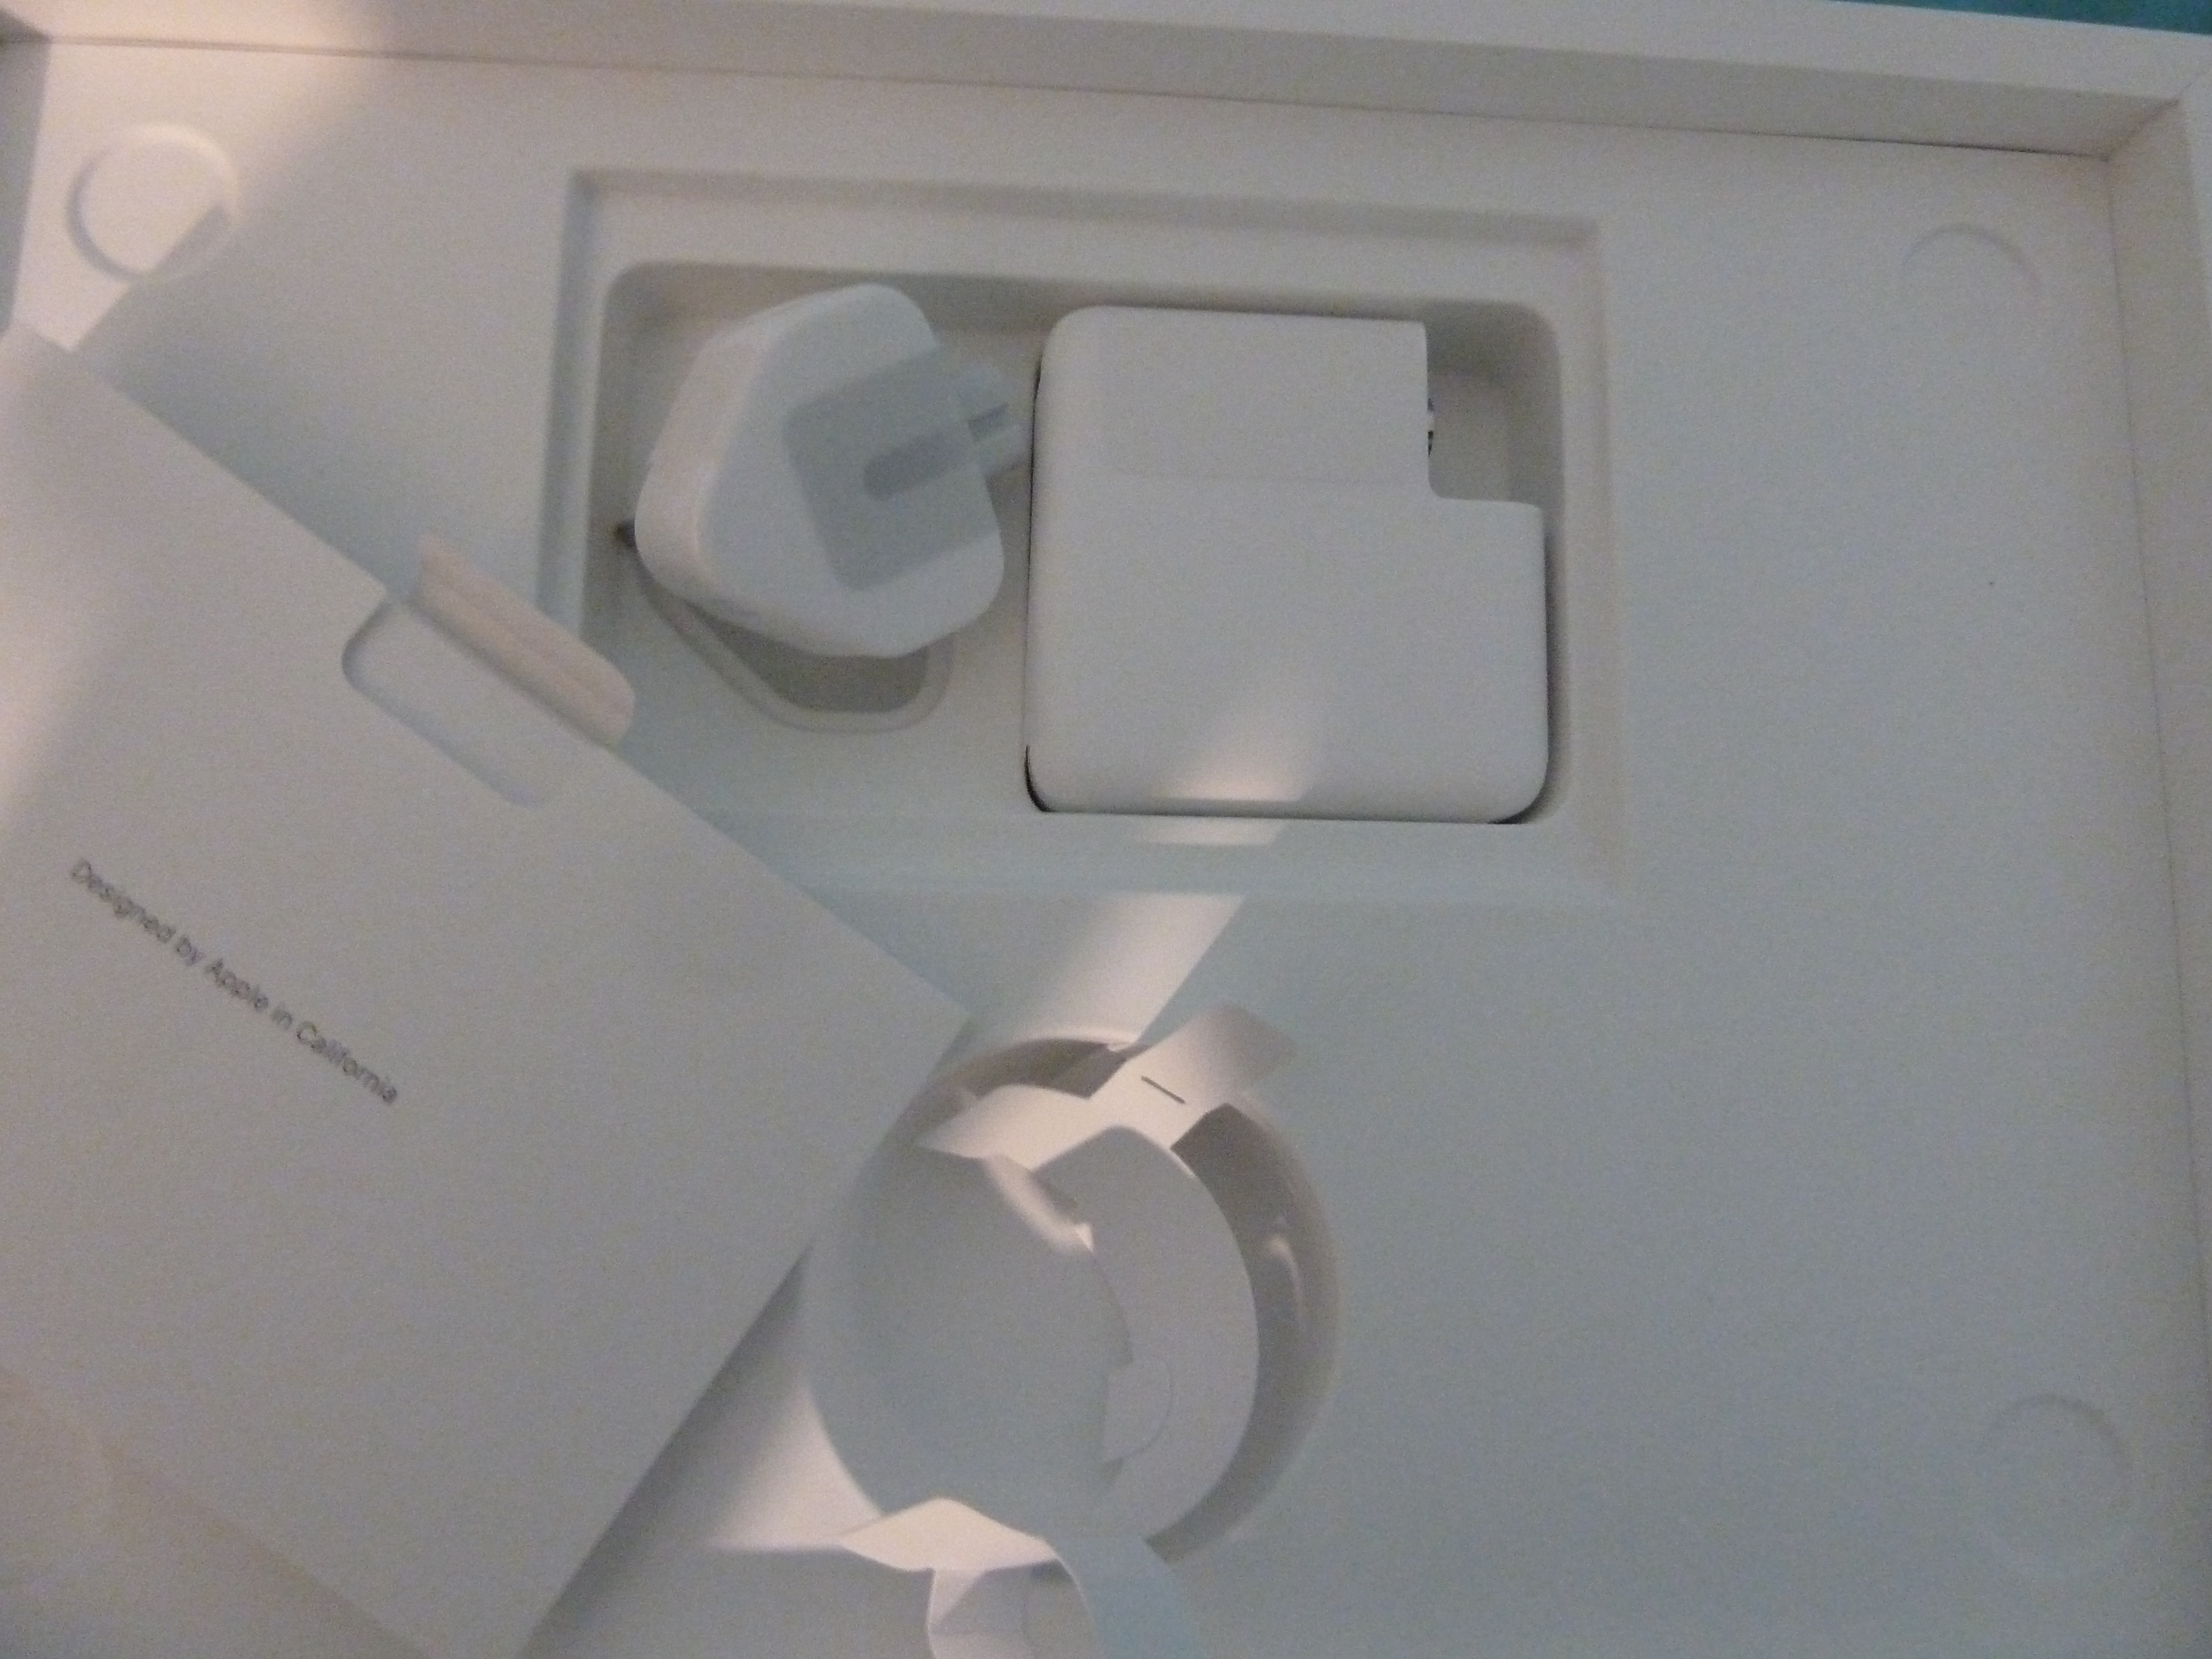 Photo of the box opened, showing power and documentation